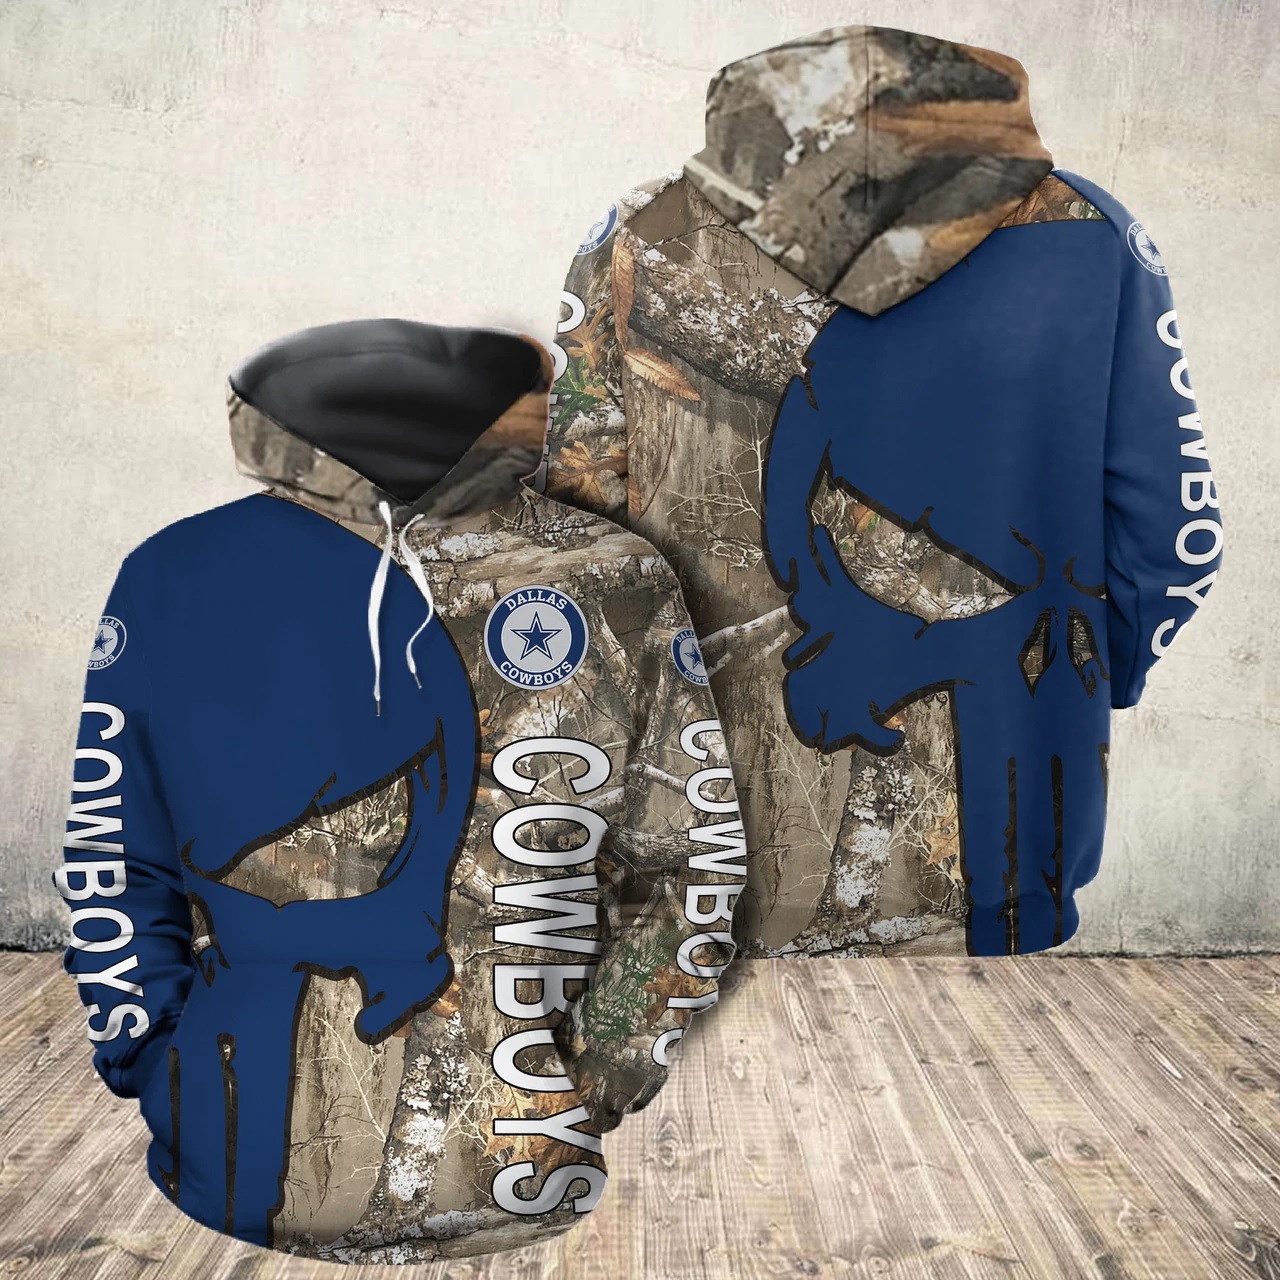 The punisher dallas cowboys all over print hoodie